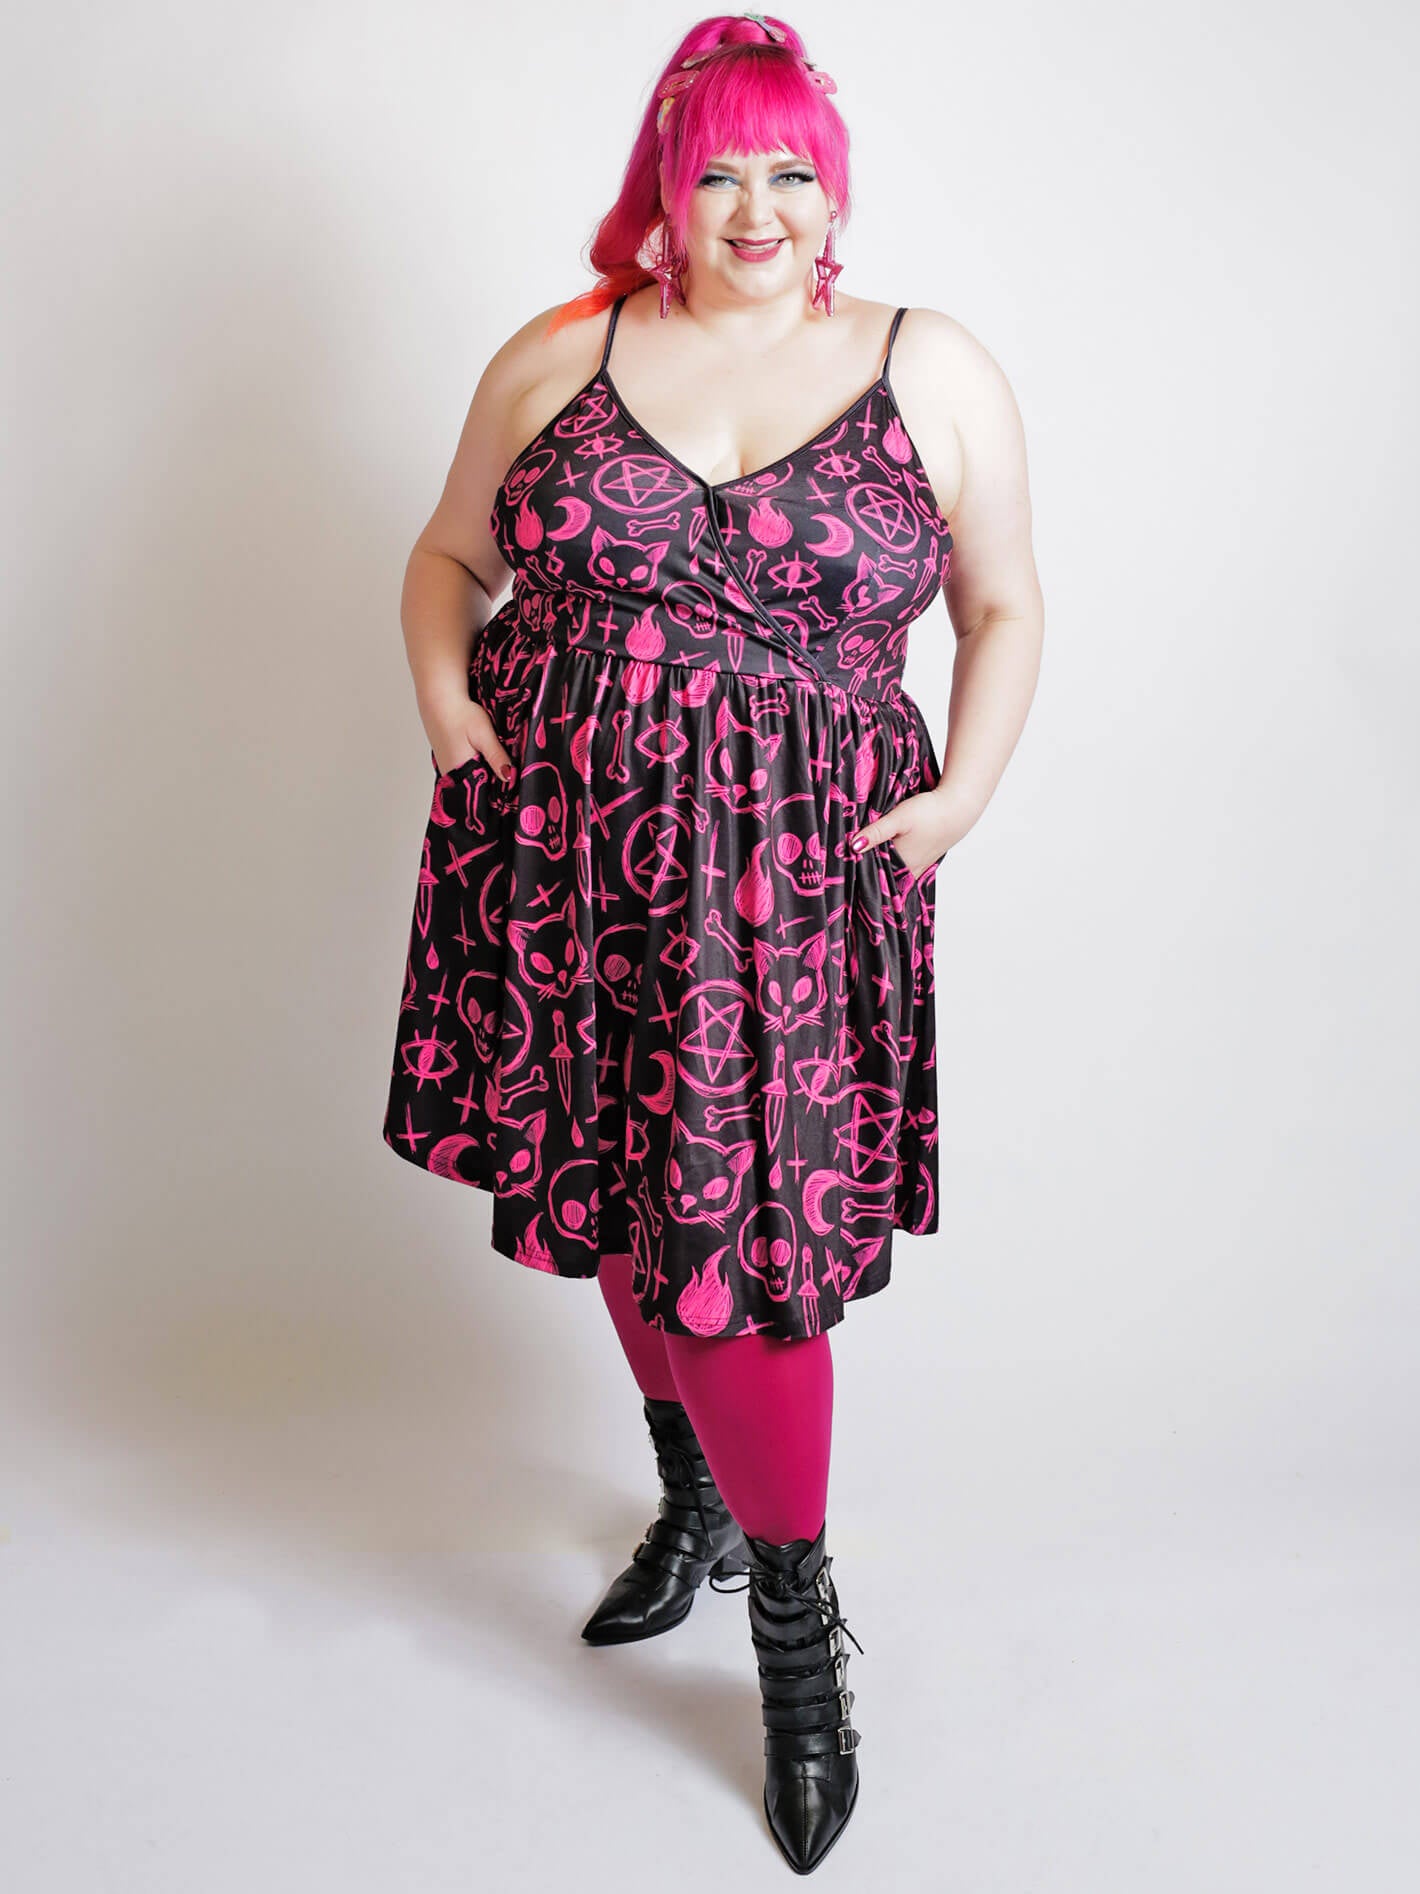 Pink and black goth plus size dress.